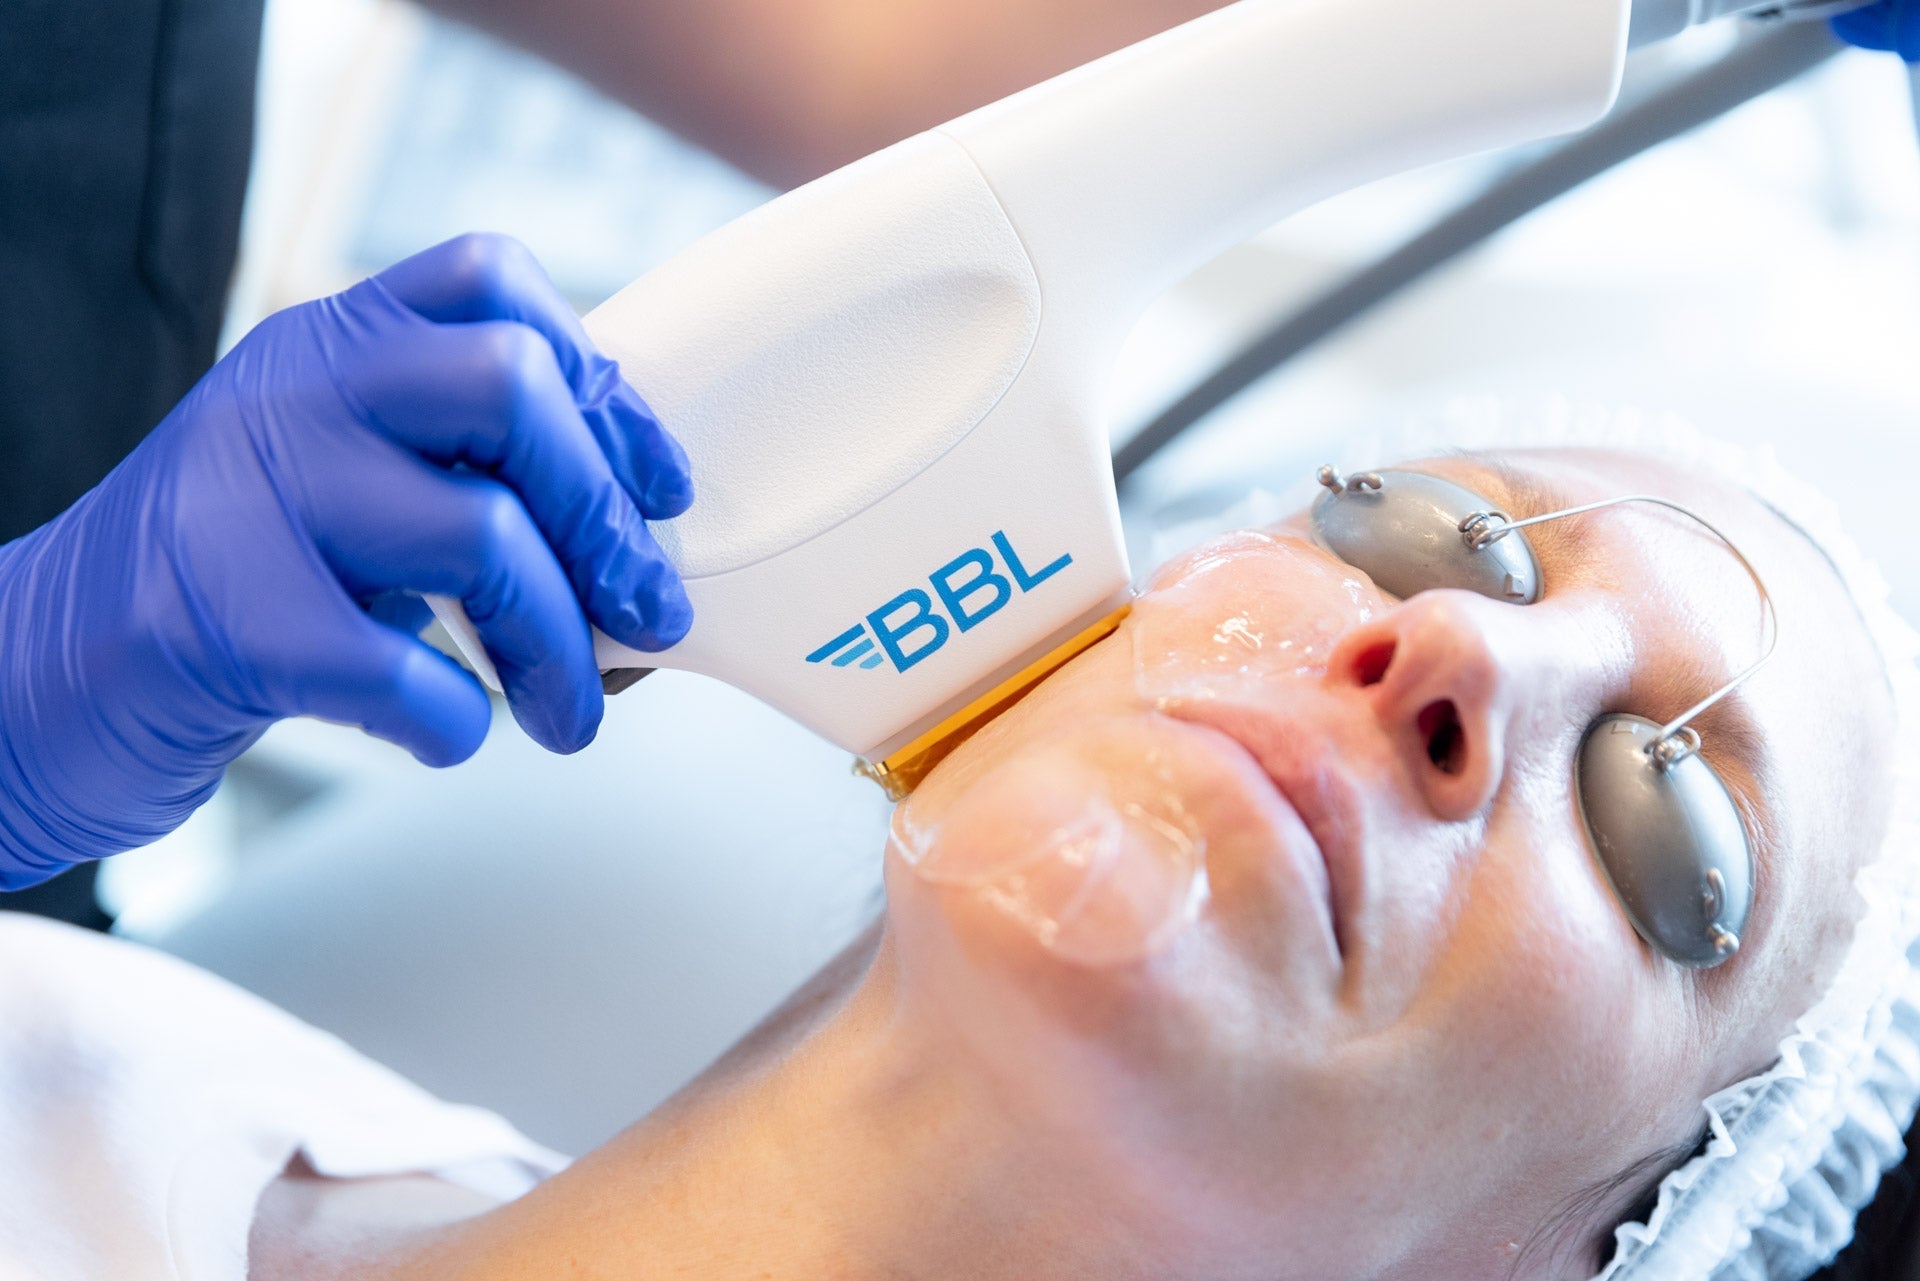 Redness Pack: BBL + GMAX + Peels for Face Course of 3 (save €901)